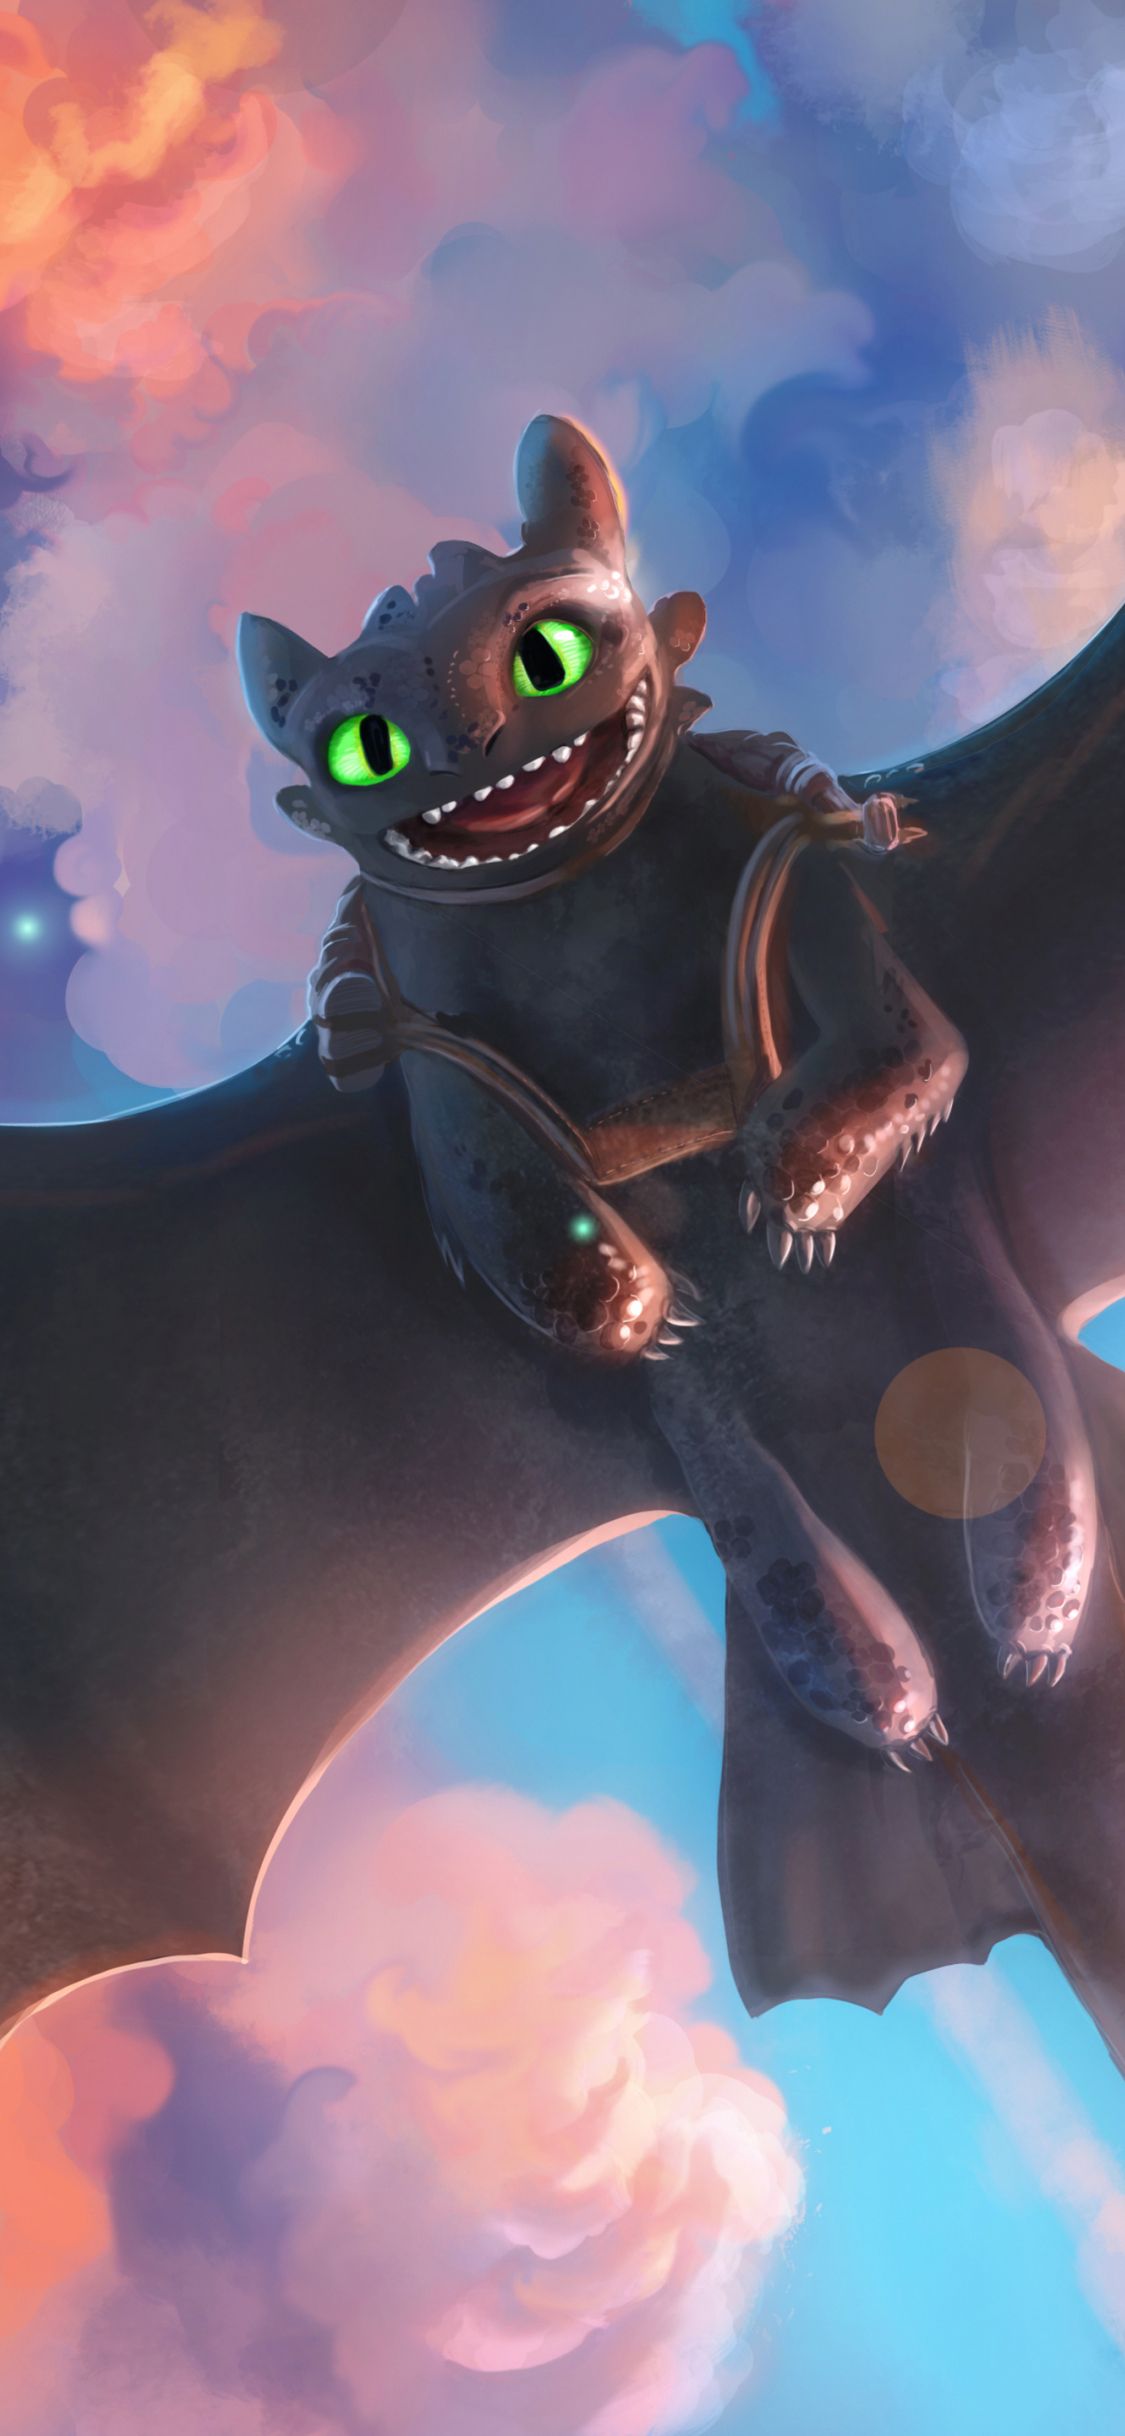 Download 1125x2436 wallpaper movie, toothless, night fury, dragon, how to train your dragon, iphone x 1125x2436 HD image, background, 15177